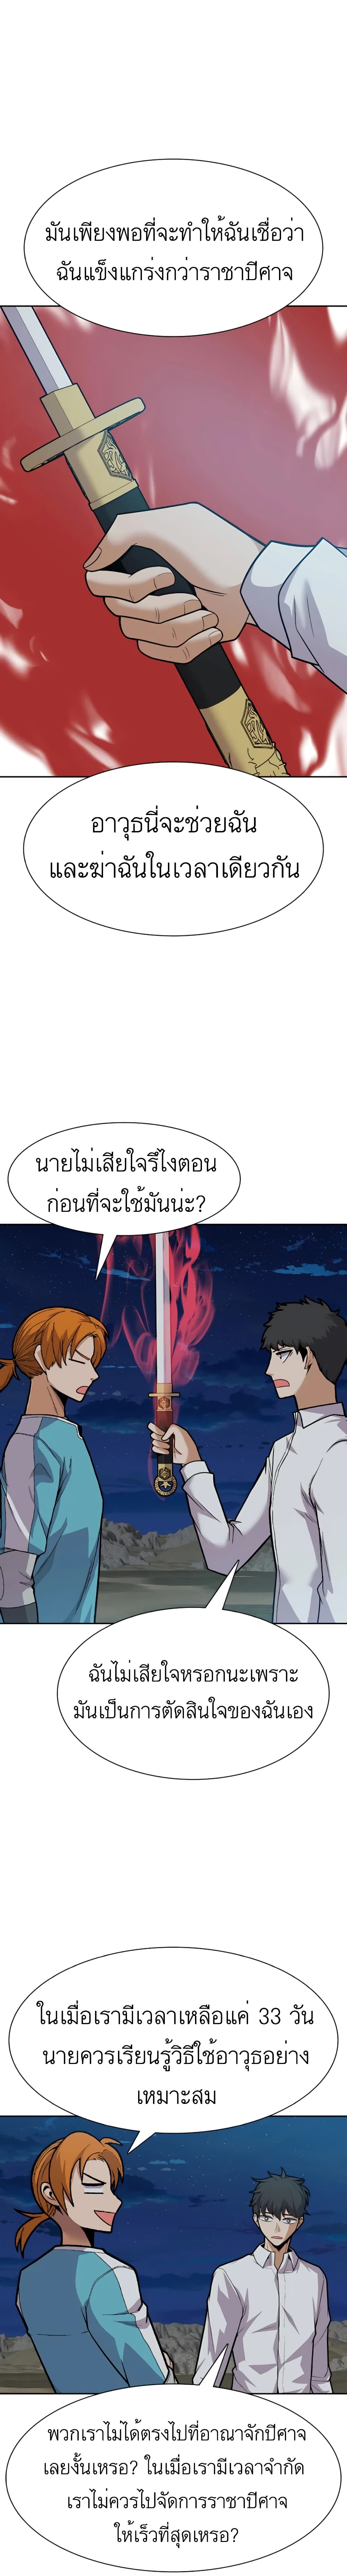 Raising Newbie Heroes In Another World ตอนที่ 23 (2)